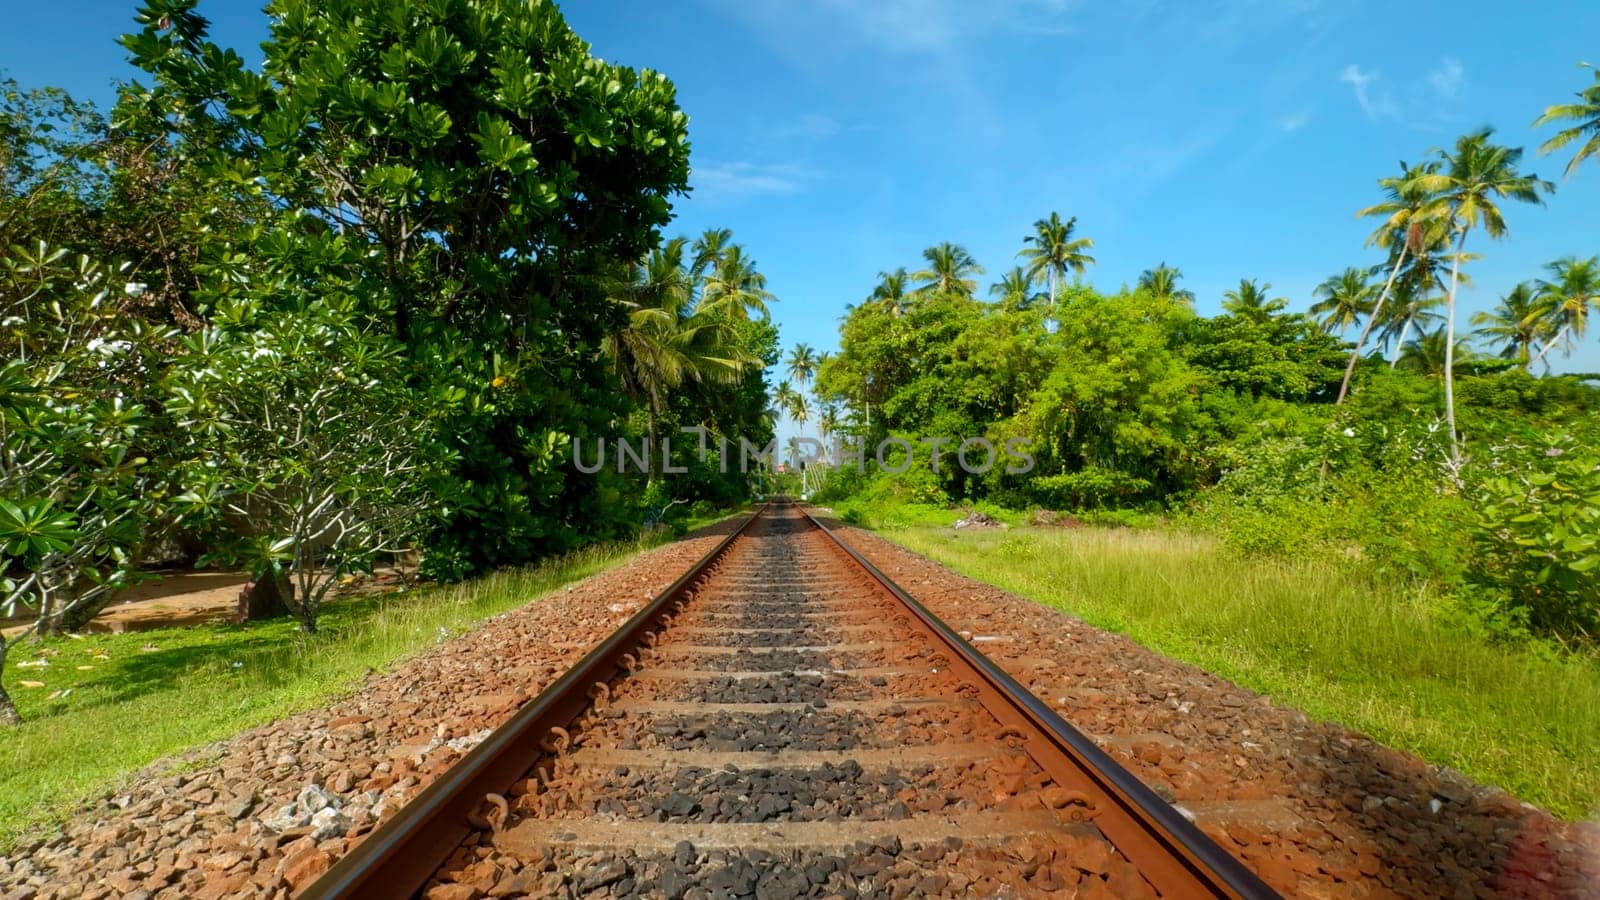 Walking along abandoned railway track. Action. Lush green tropical vegetation on a summer day. by Mediawhalestock